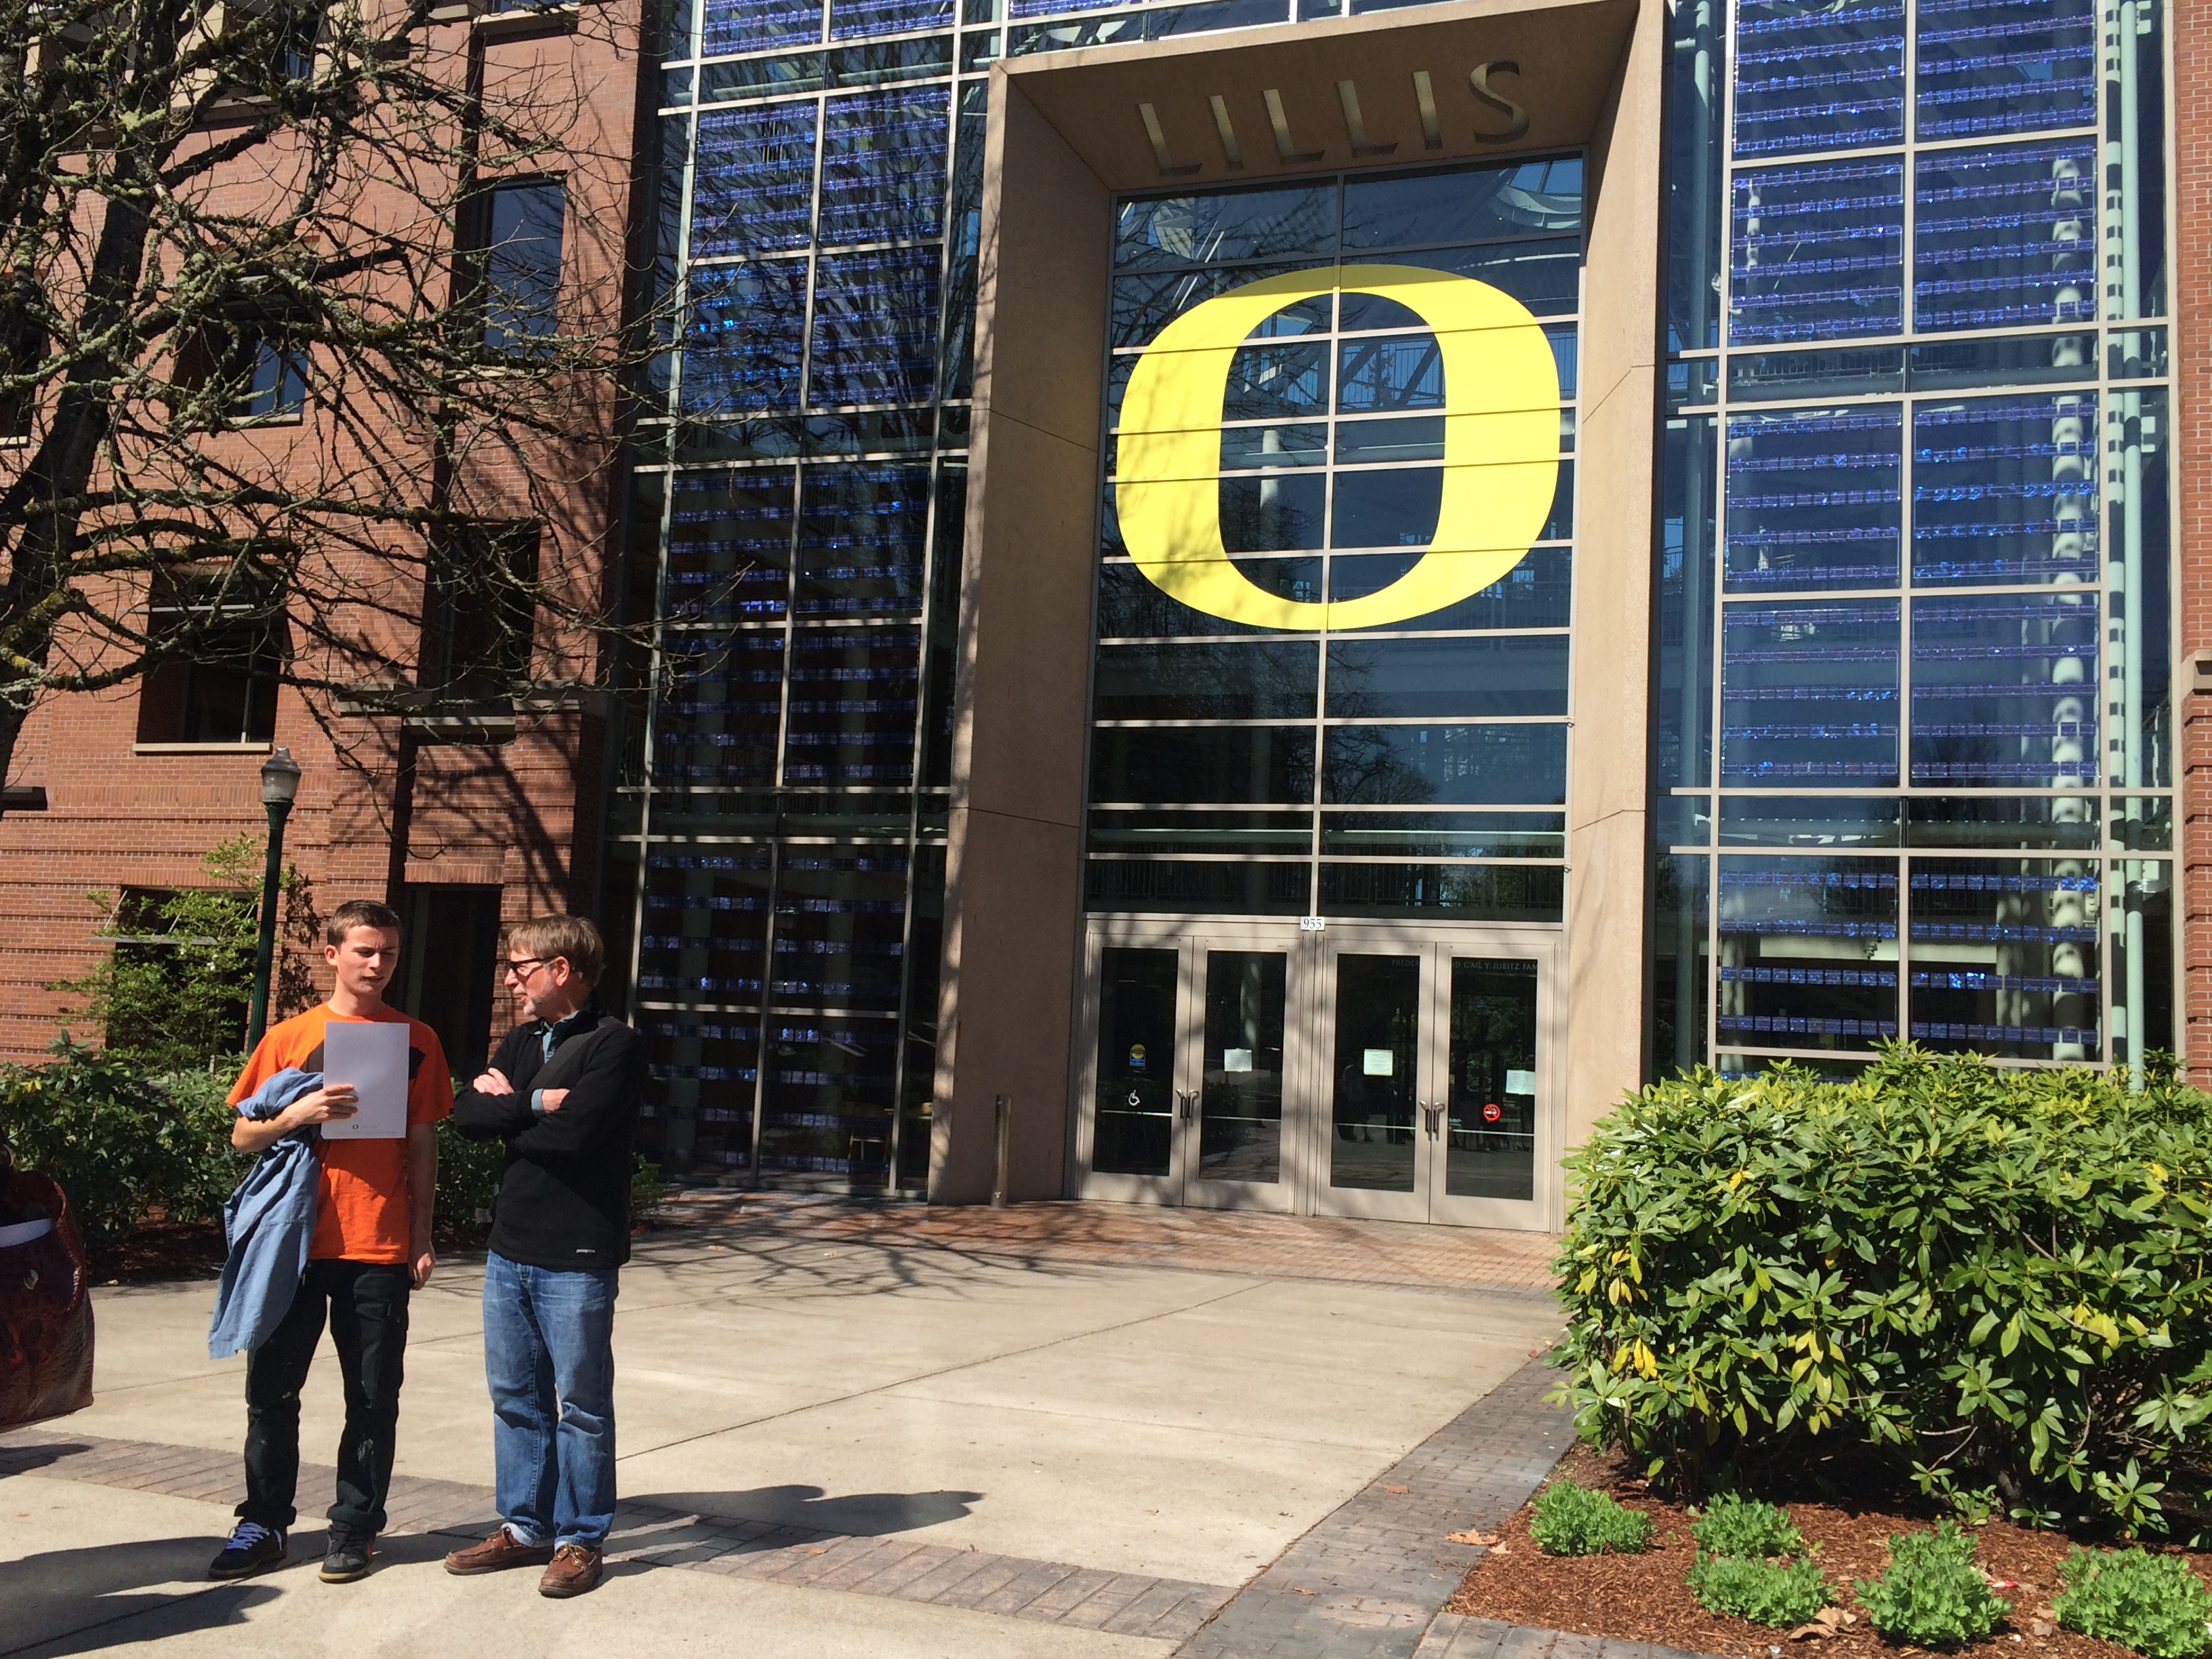 University Of Oregon Will Require Students Living In Residence Halls To Be Tested For Covid 19 Upon Arrival At Least Once More In Fall Oregonlive Com